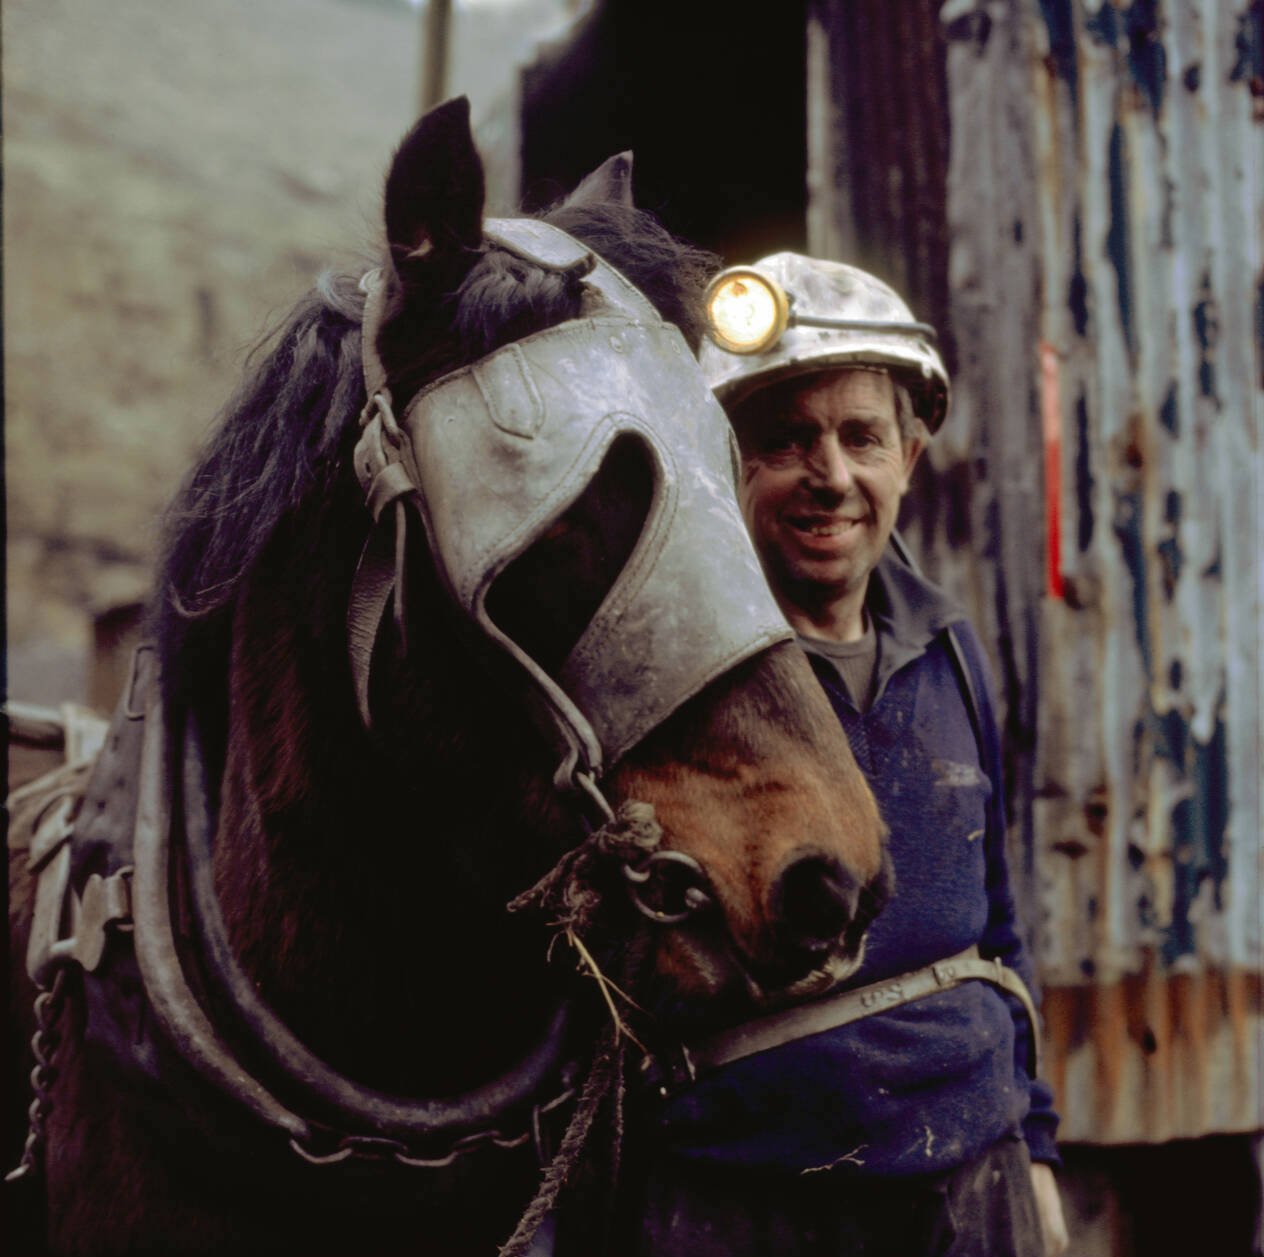 A pit pony and handler at  a mine in South Wales, 1980. David Williams/Alamy Stock Photo.